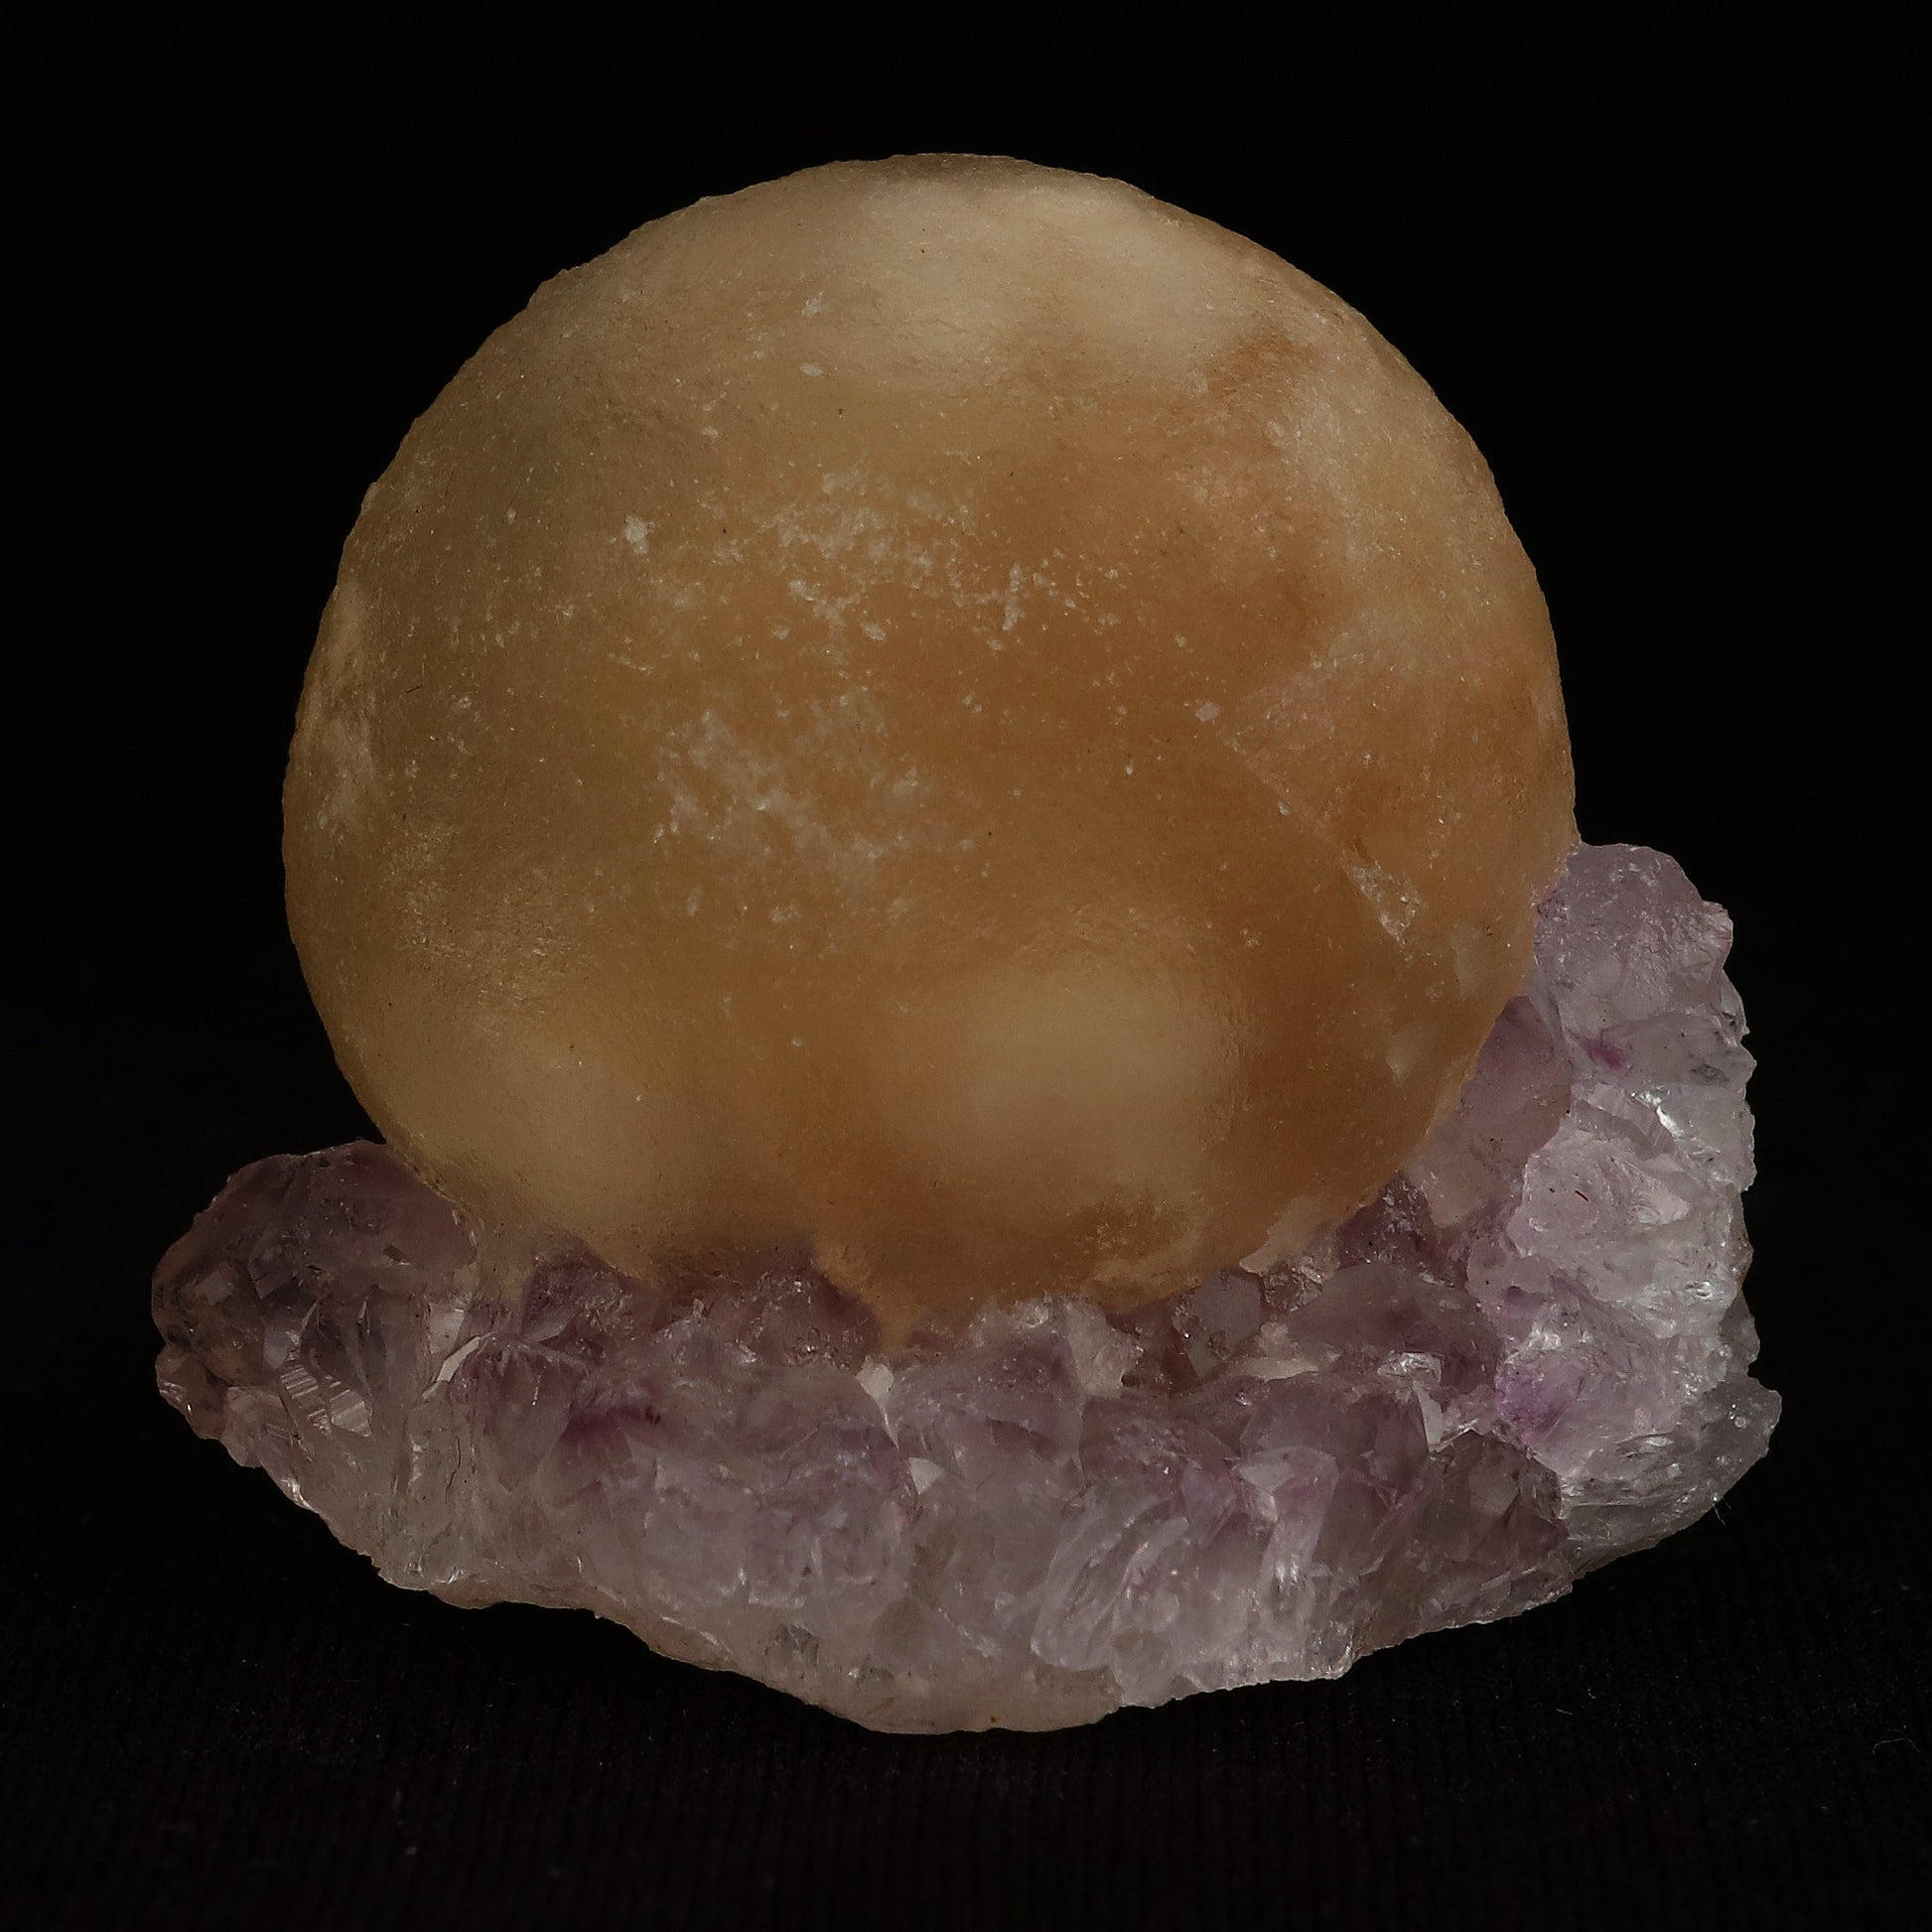 Fluorite Botryoidal on Amethyst Natural Mineral Specimen # B 5078  https://www.superbminerals.us/products/fluorite-botryoidal-on-amethyst-natural-mineral-specimen-b-5078  Features: An extraordinarily botryoidal "ball" of Fluorite is perched atop an exceptionally rich purple coloured Amethyst on Chalcedony and host rock matrix, creating an unusually beautiful specimen.&nbsp; On the surface, the Fluorite is a creamy-white tone that gradually fades away to a golden hue in the middle.